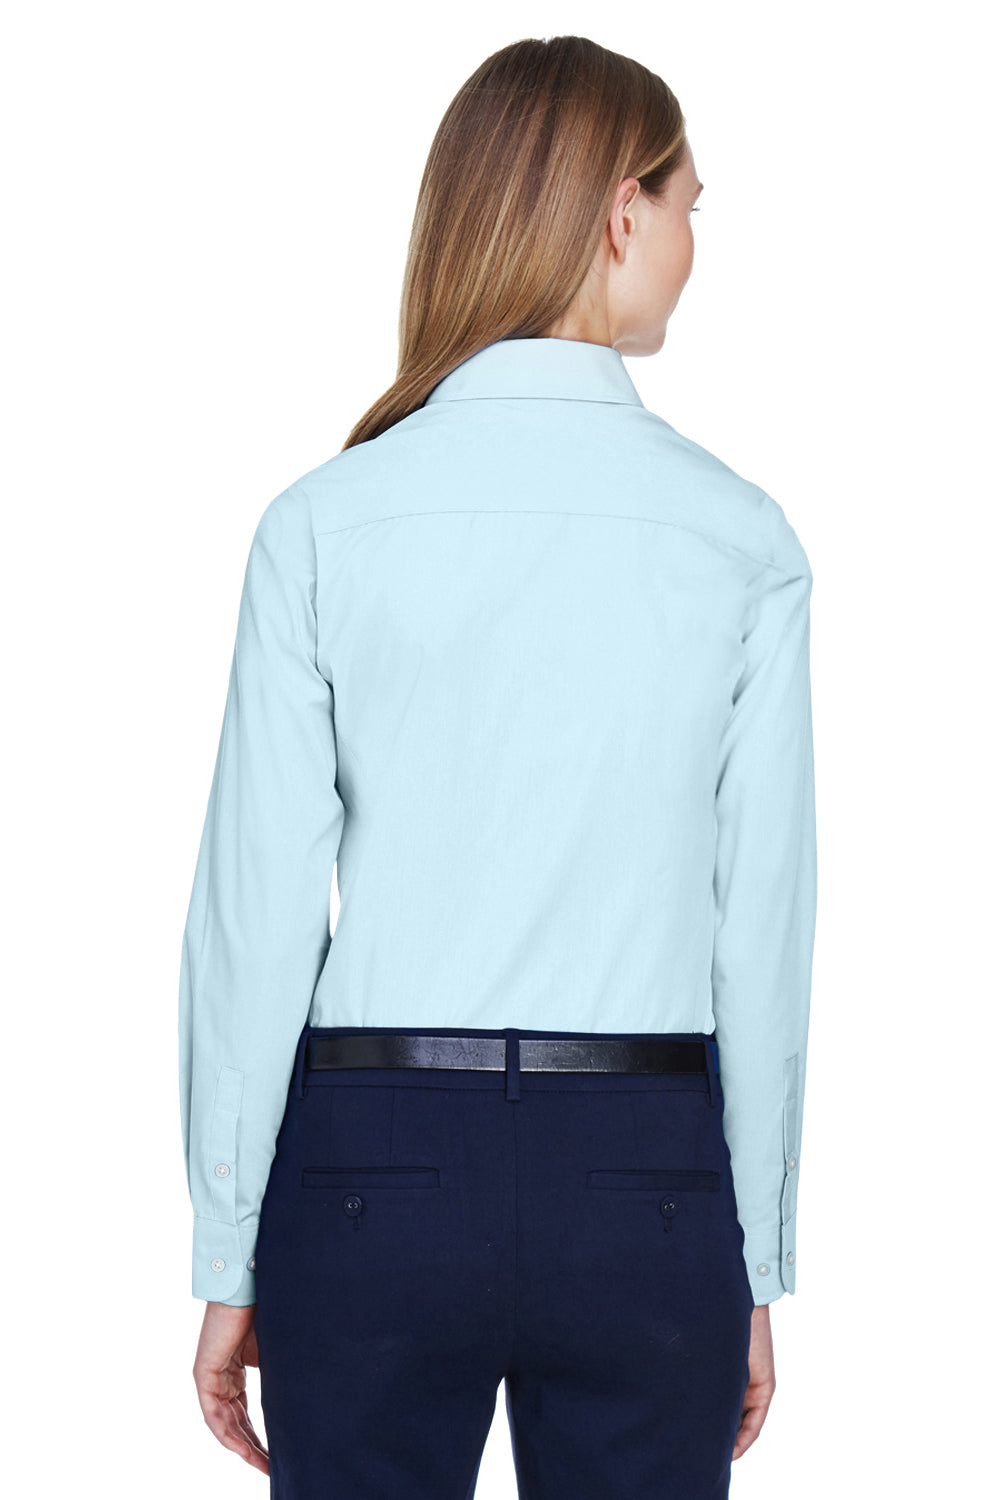 Devon & Jones D620W Womens Crown Woven Collection Wrinkle Resistant Long Sleeve Button Down Shirt Crystal Blue Back